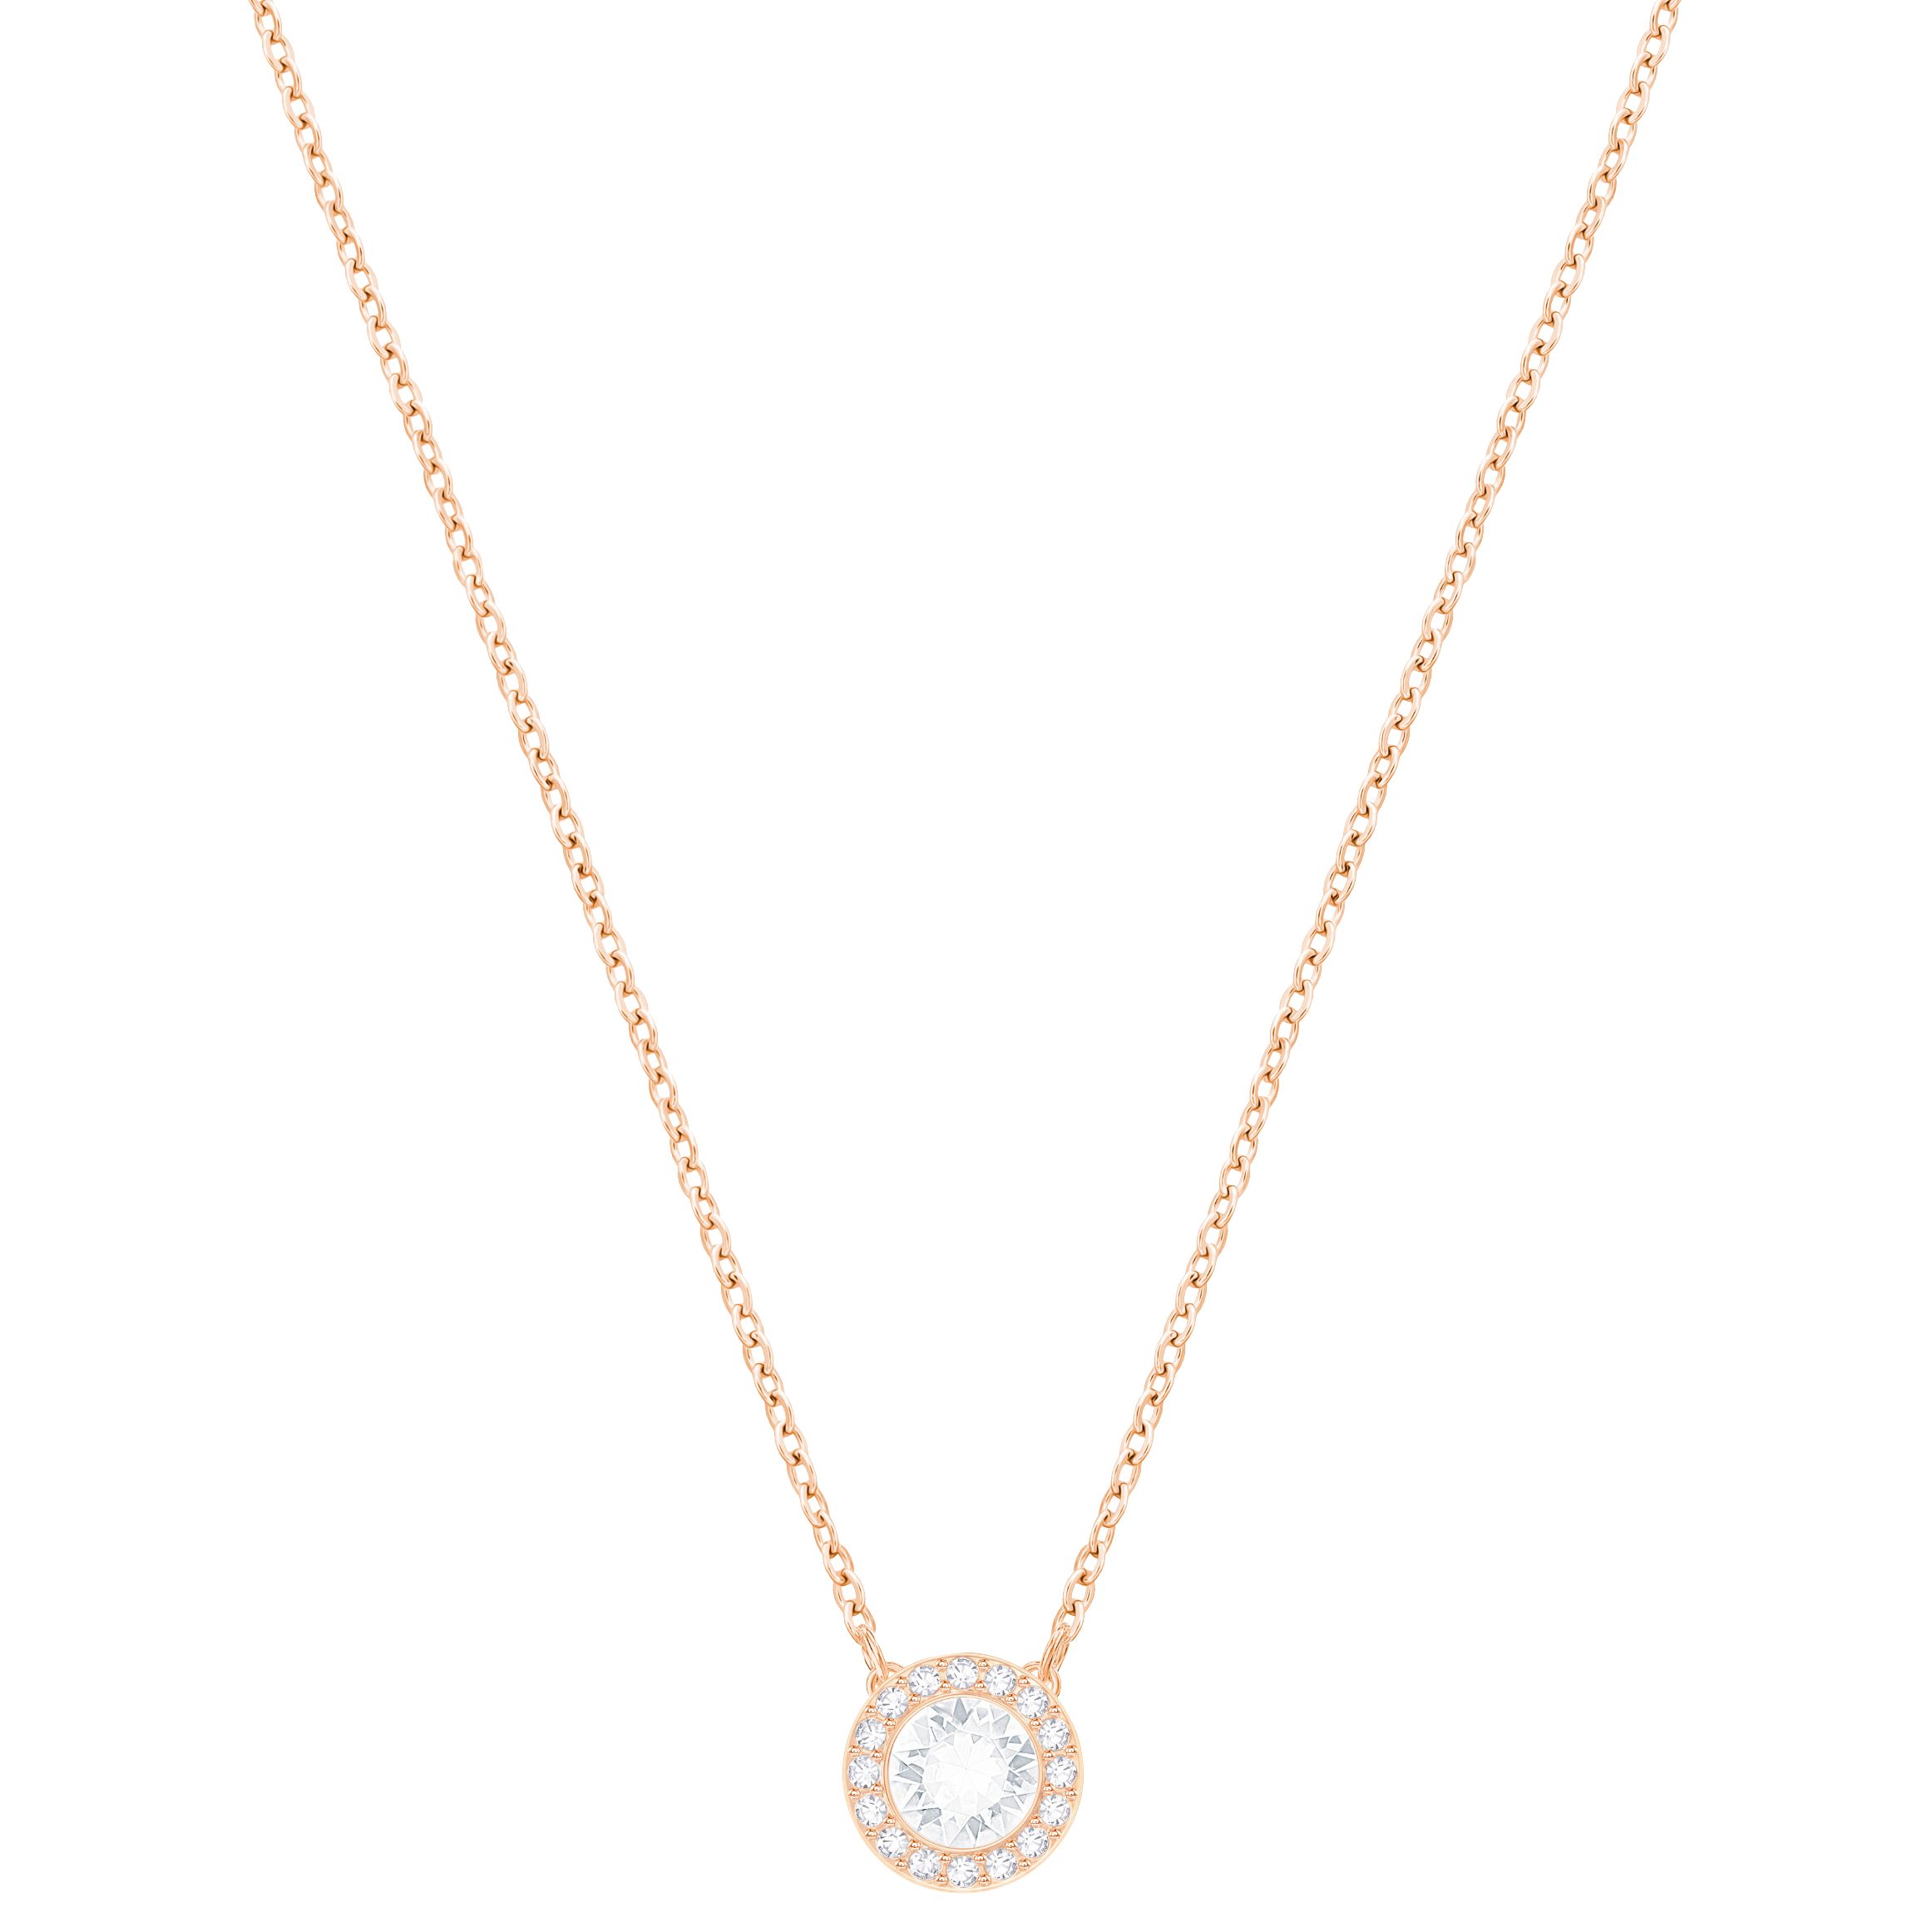 Swarovski Angelic Round Crystal Pendant Necklace, Rose Gold/Clear at ...